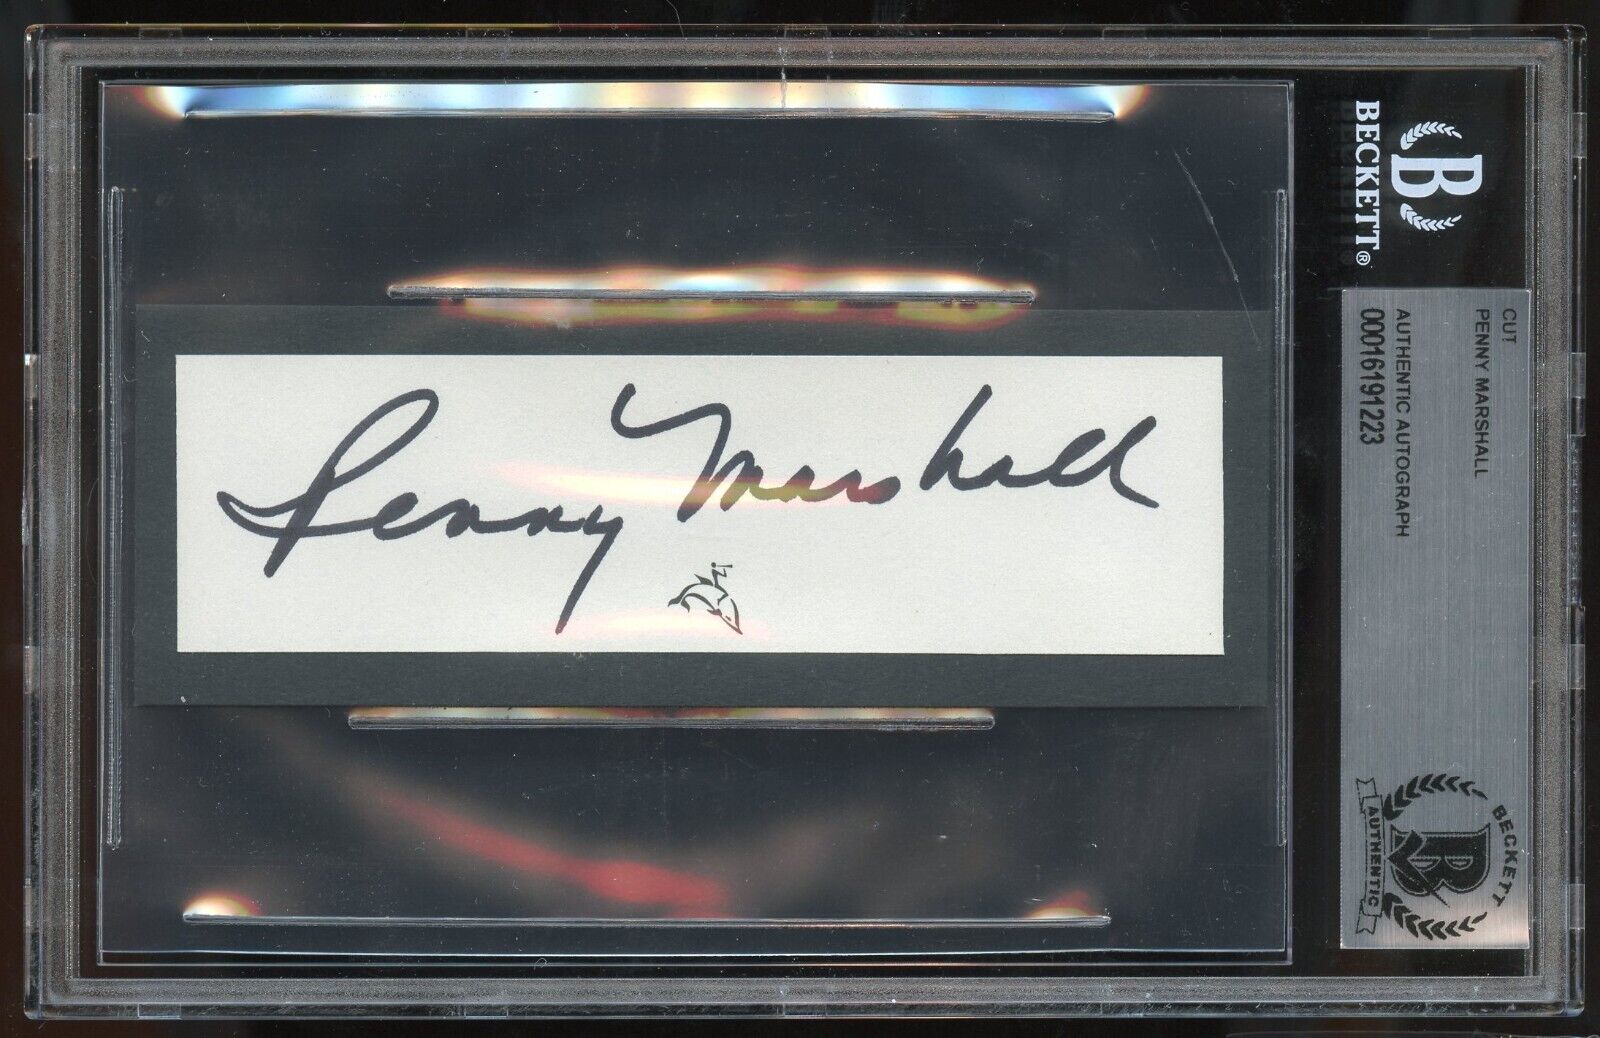 Penny Marshall signed autograph 1x5 cut Actress Laverne & Shirley BAS Slabbed